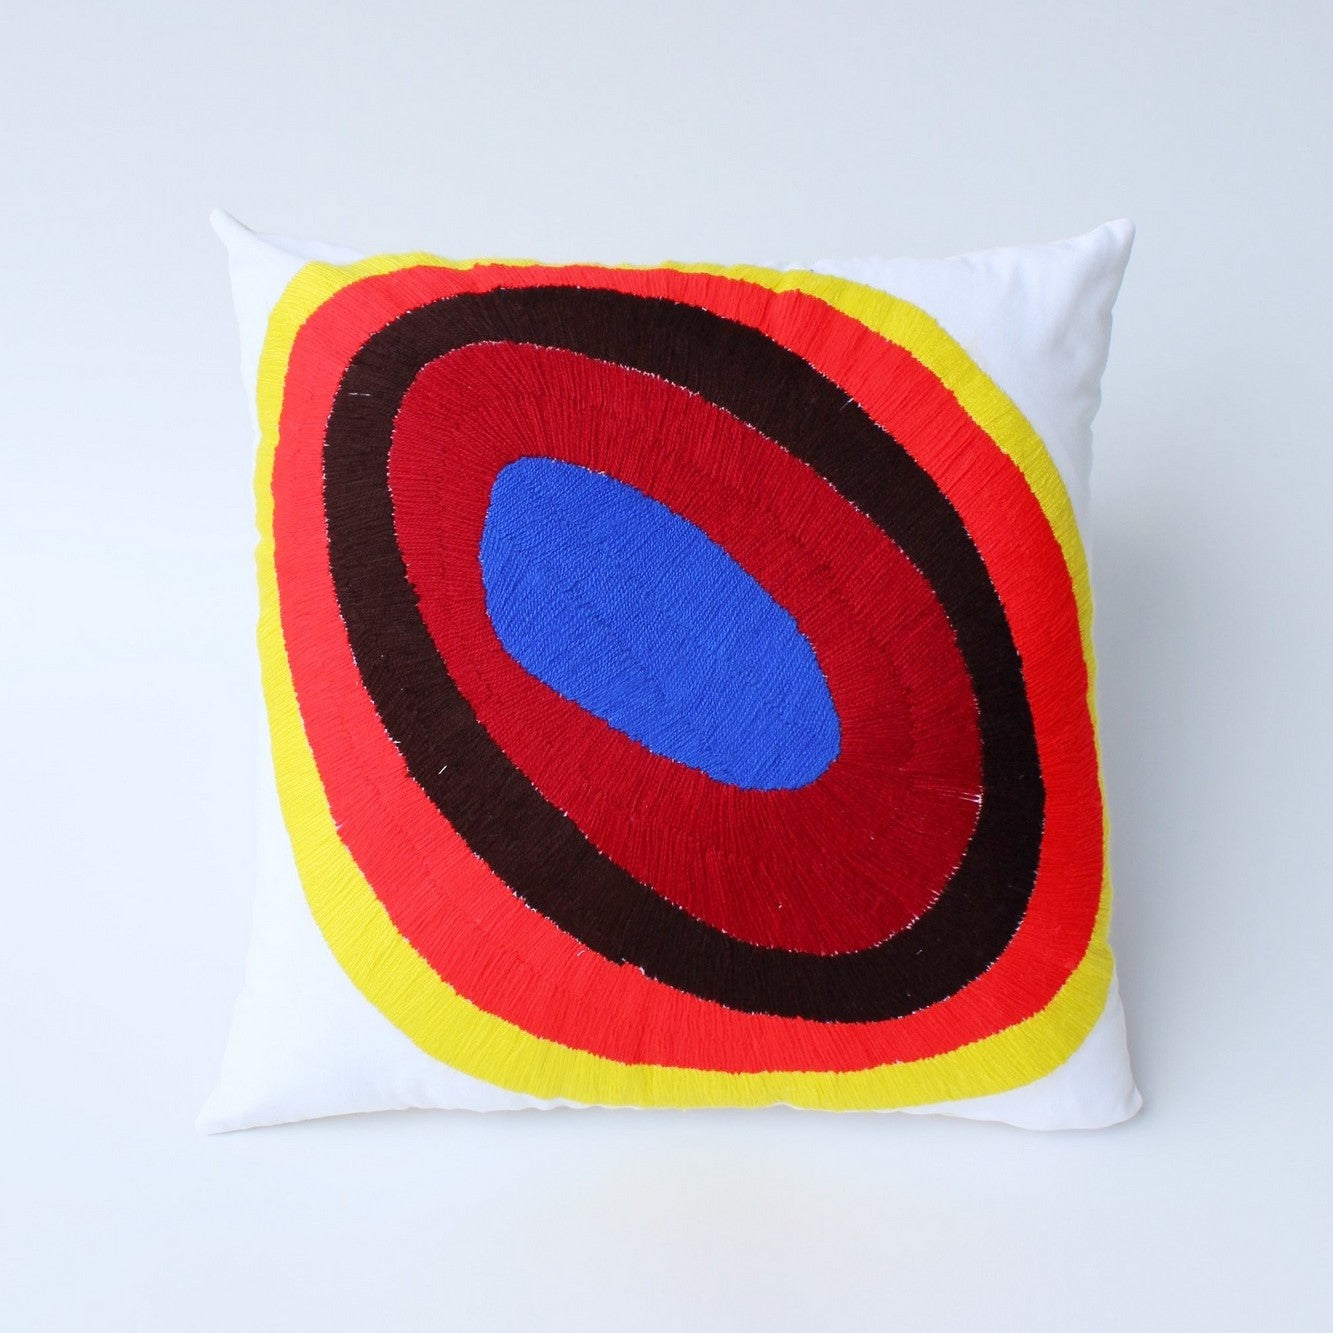 Embroidered pillow cover 16"x16"- Circles BLACK